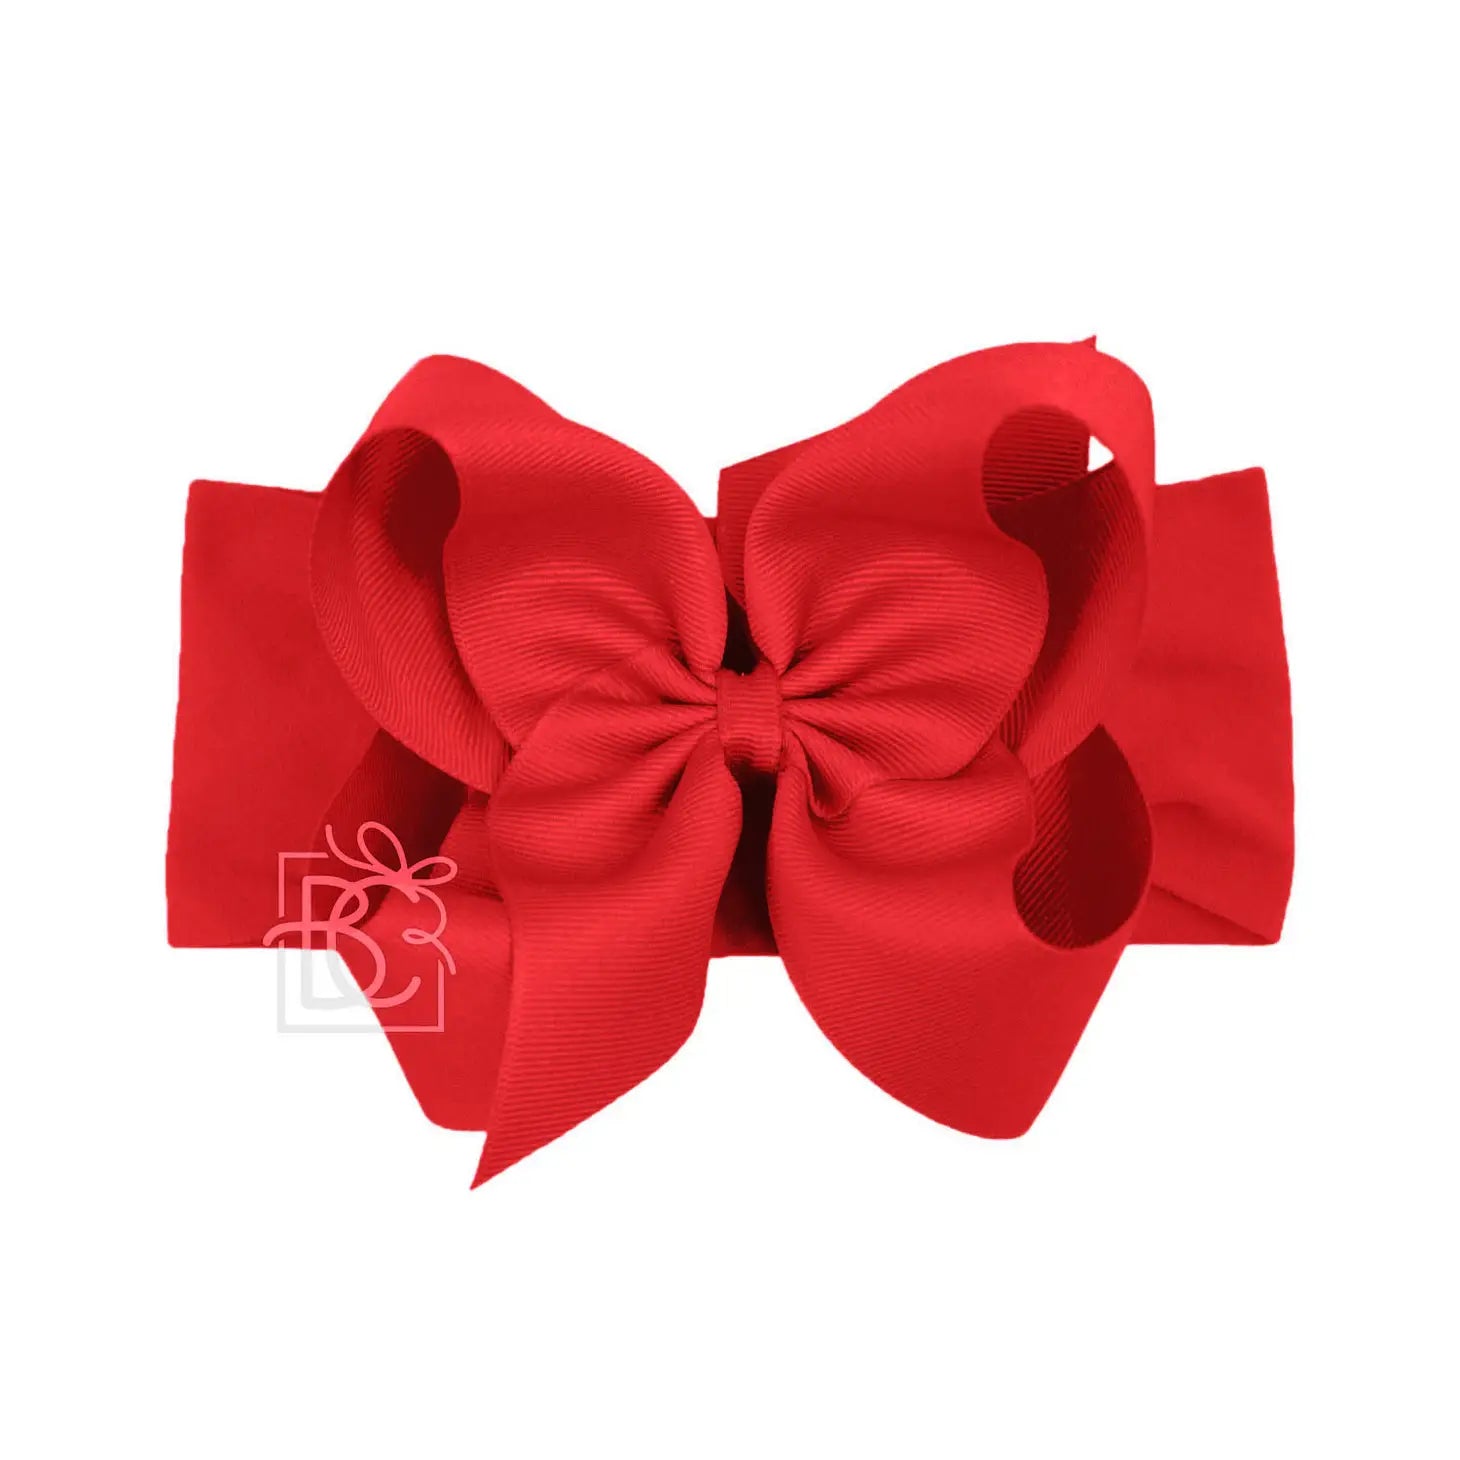 Wide Nylon Headband with Huge Bow in Red  - Doodlebug's Children's Boutique